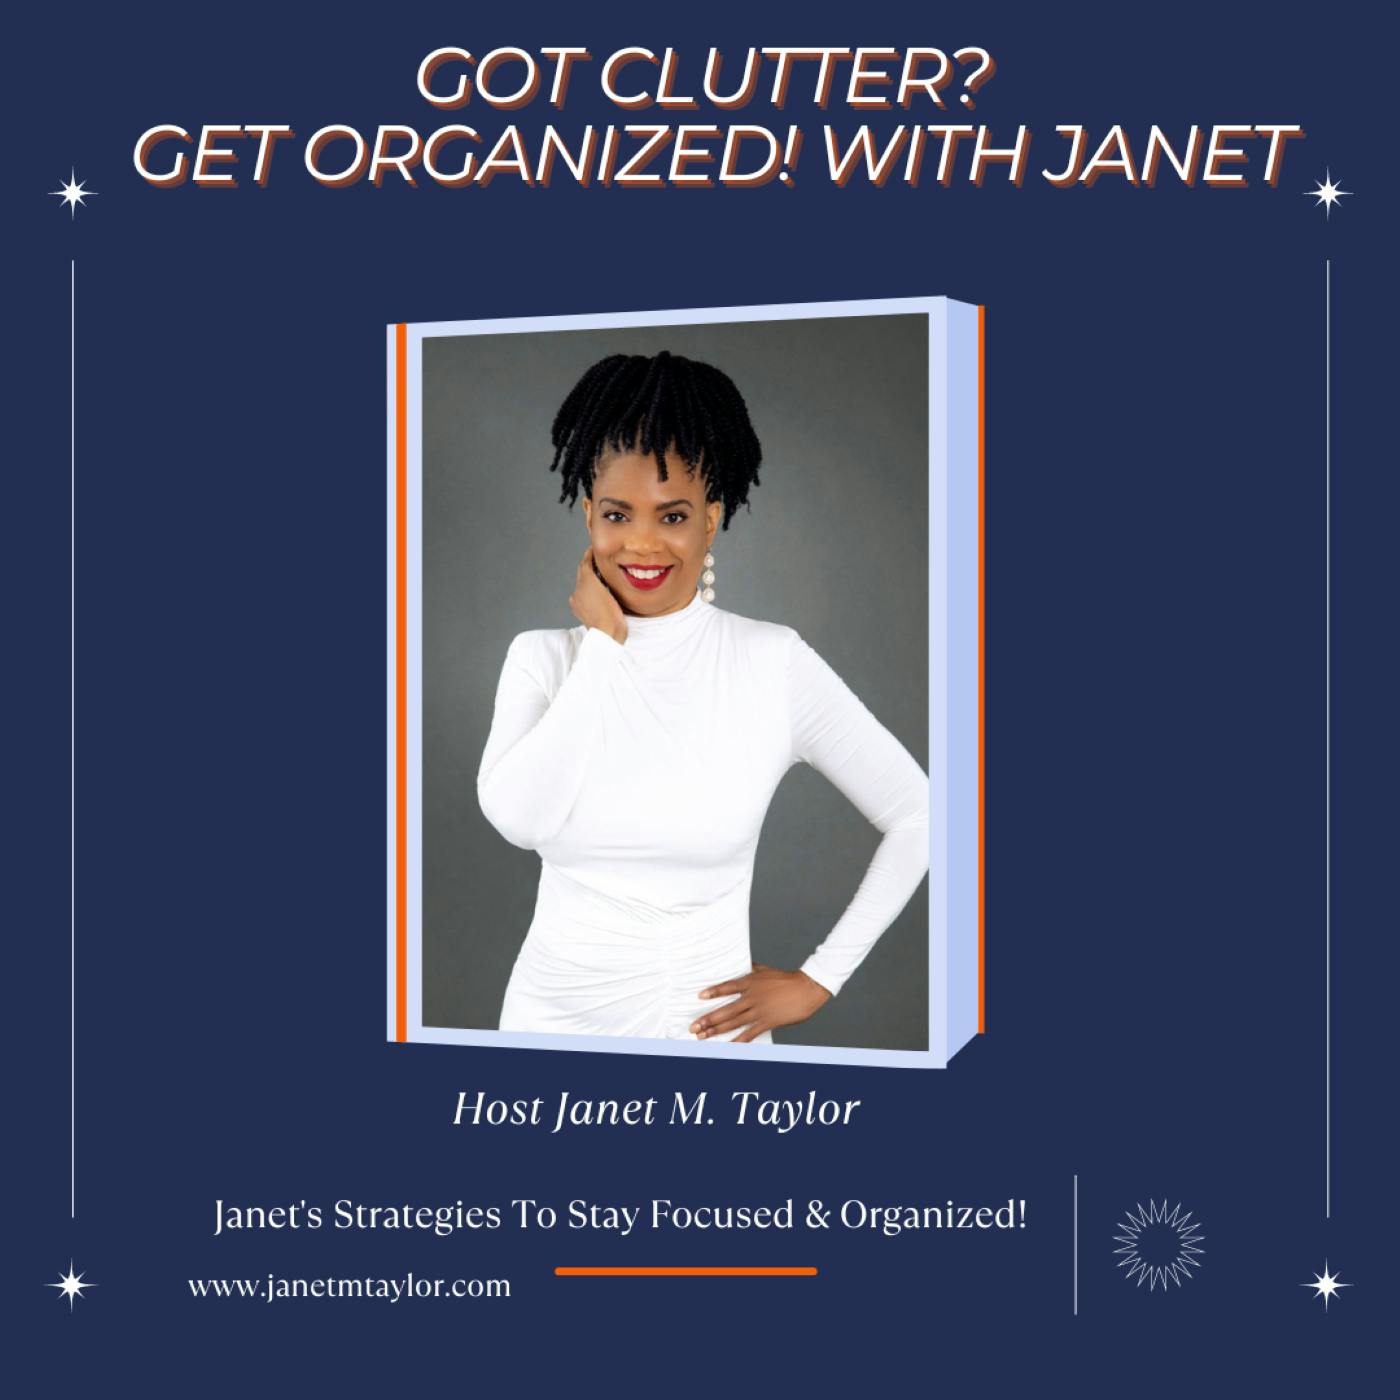 Janet’s Strategies To Stay Focused and Organized!